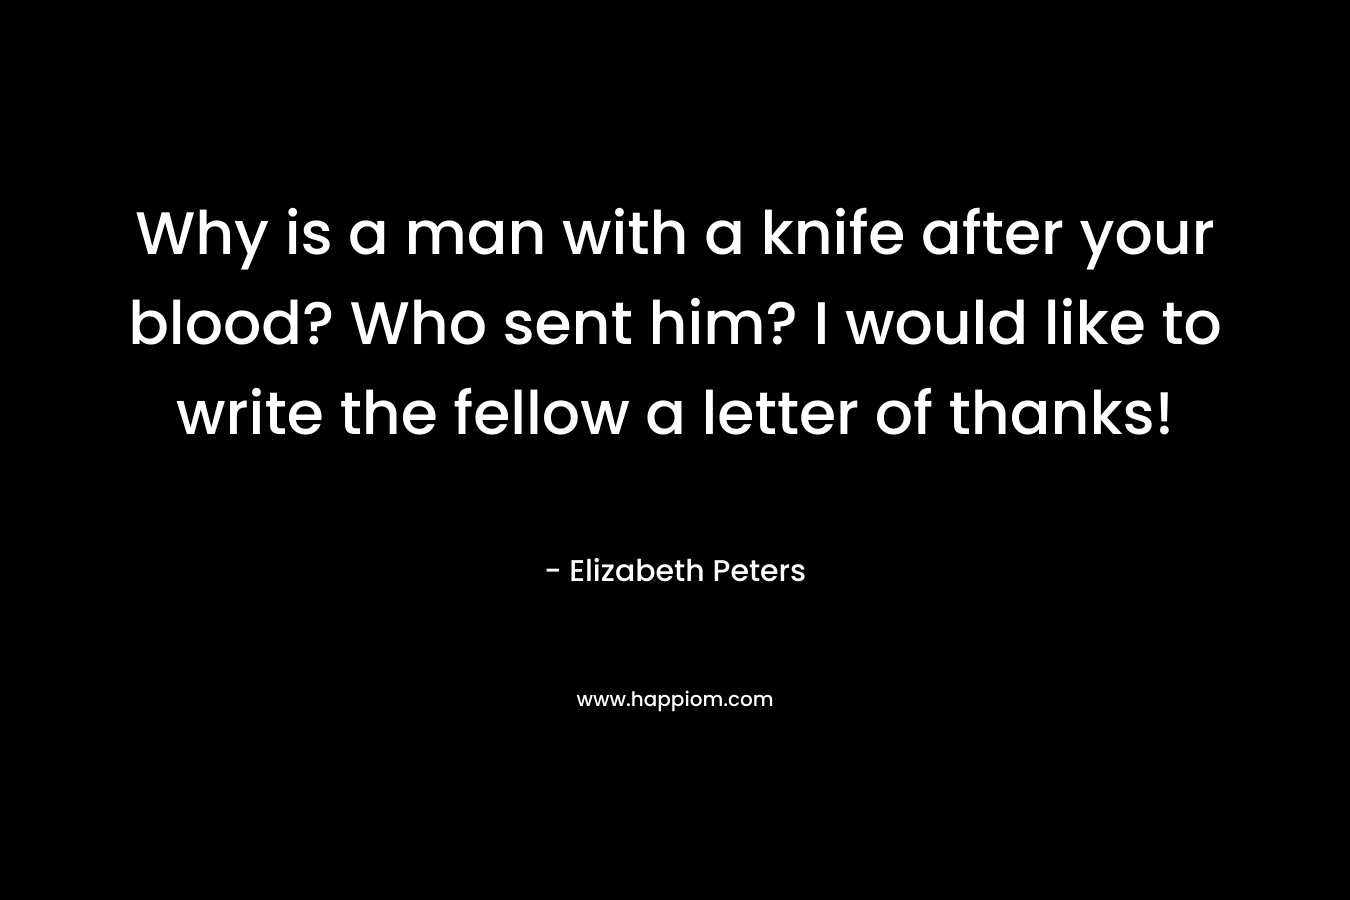 Why is a man with a knife after your blood? Who sent him? I would like to write the fellow a letter of thanks!